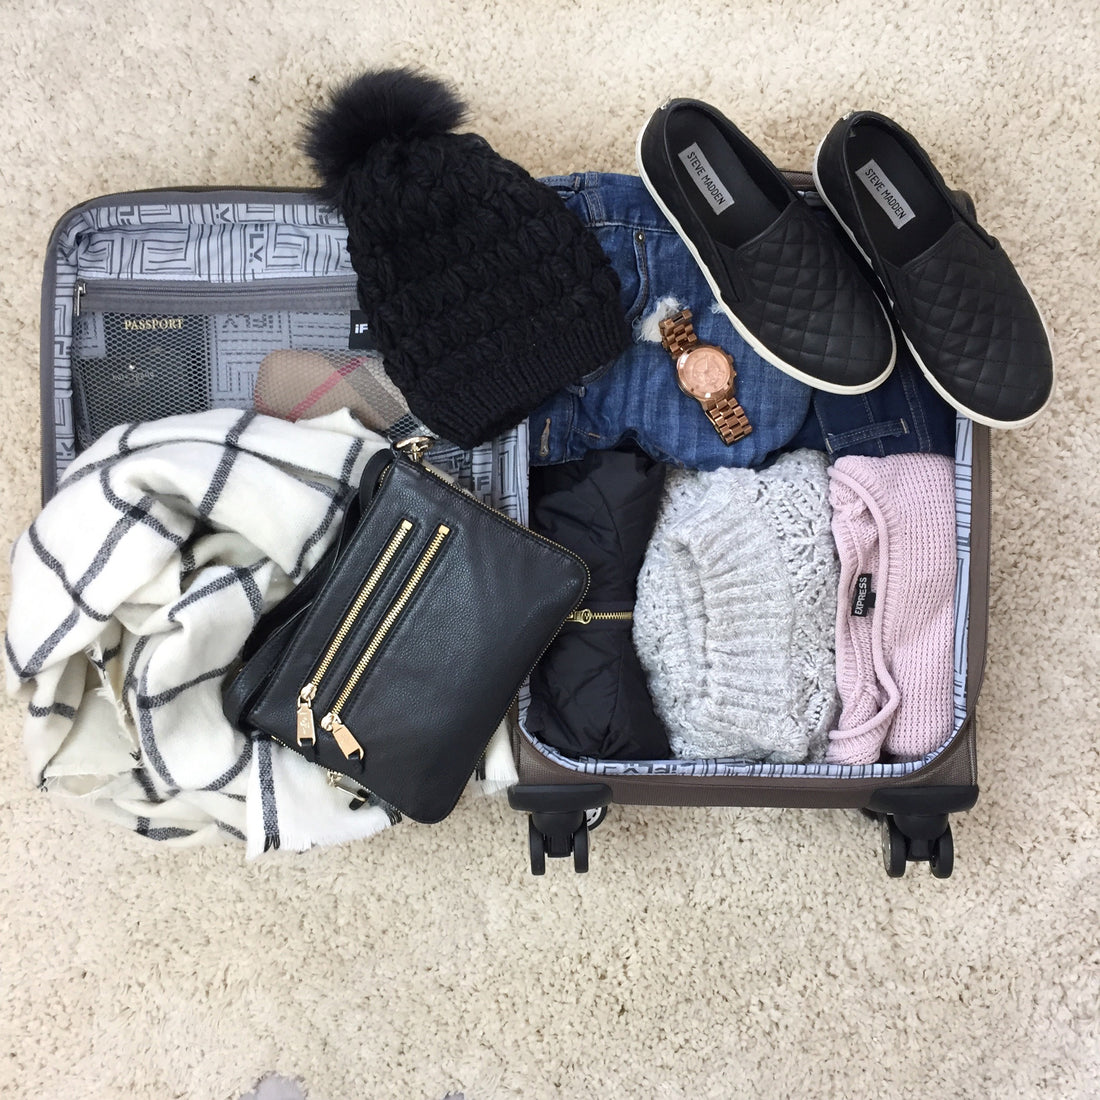 10 Packing Tips to Help You Travel Like a Pro